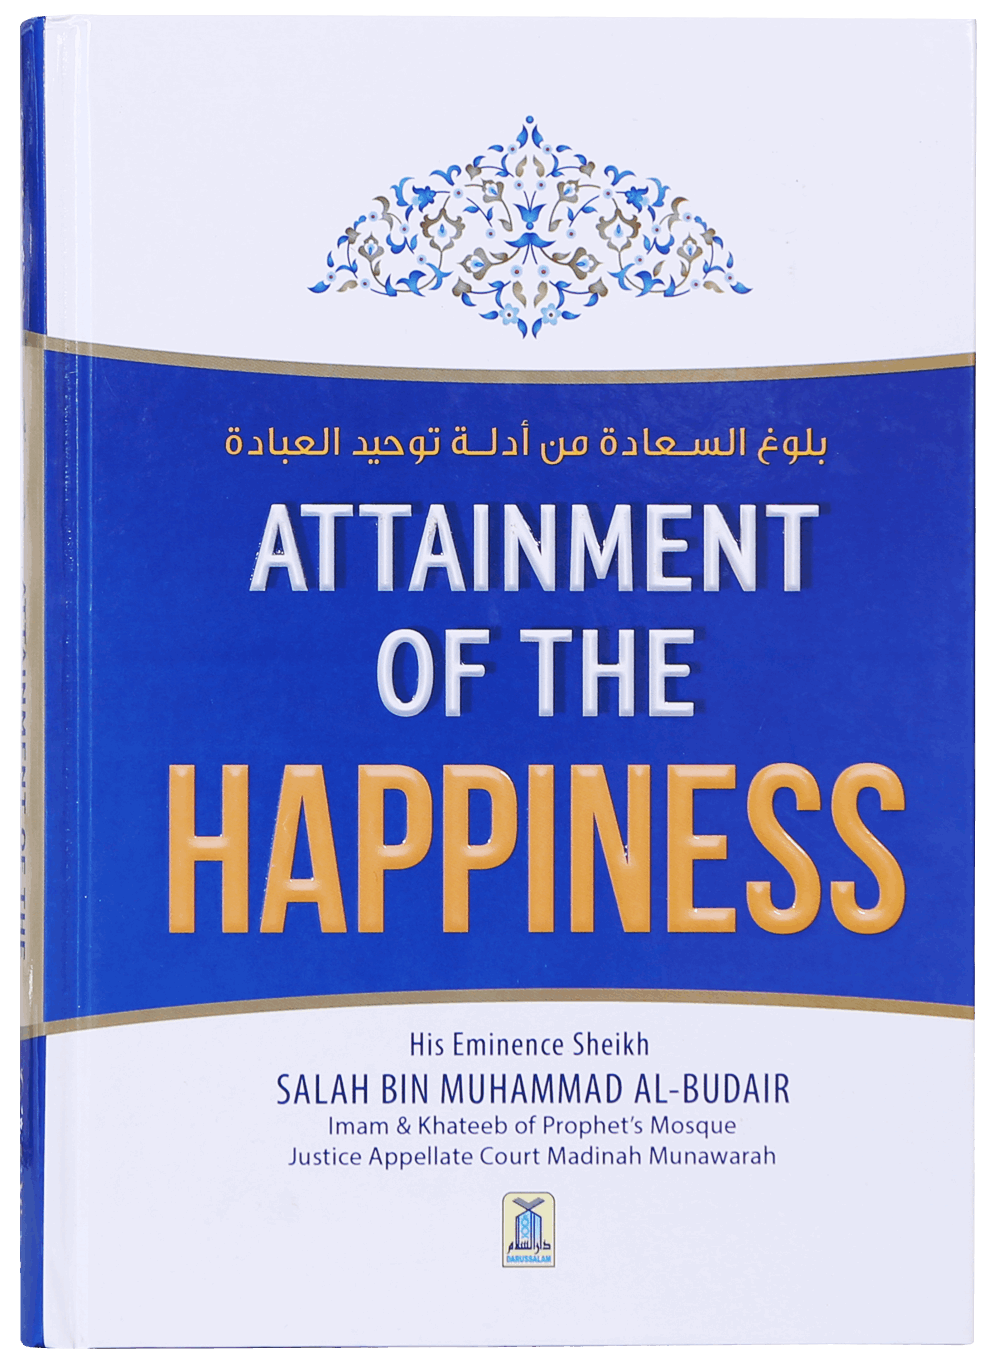 darussalam-2017-07-27-16-49-34attainment-of-the-happiness-(1)